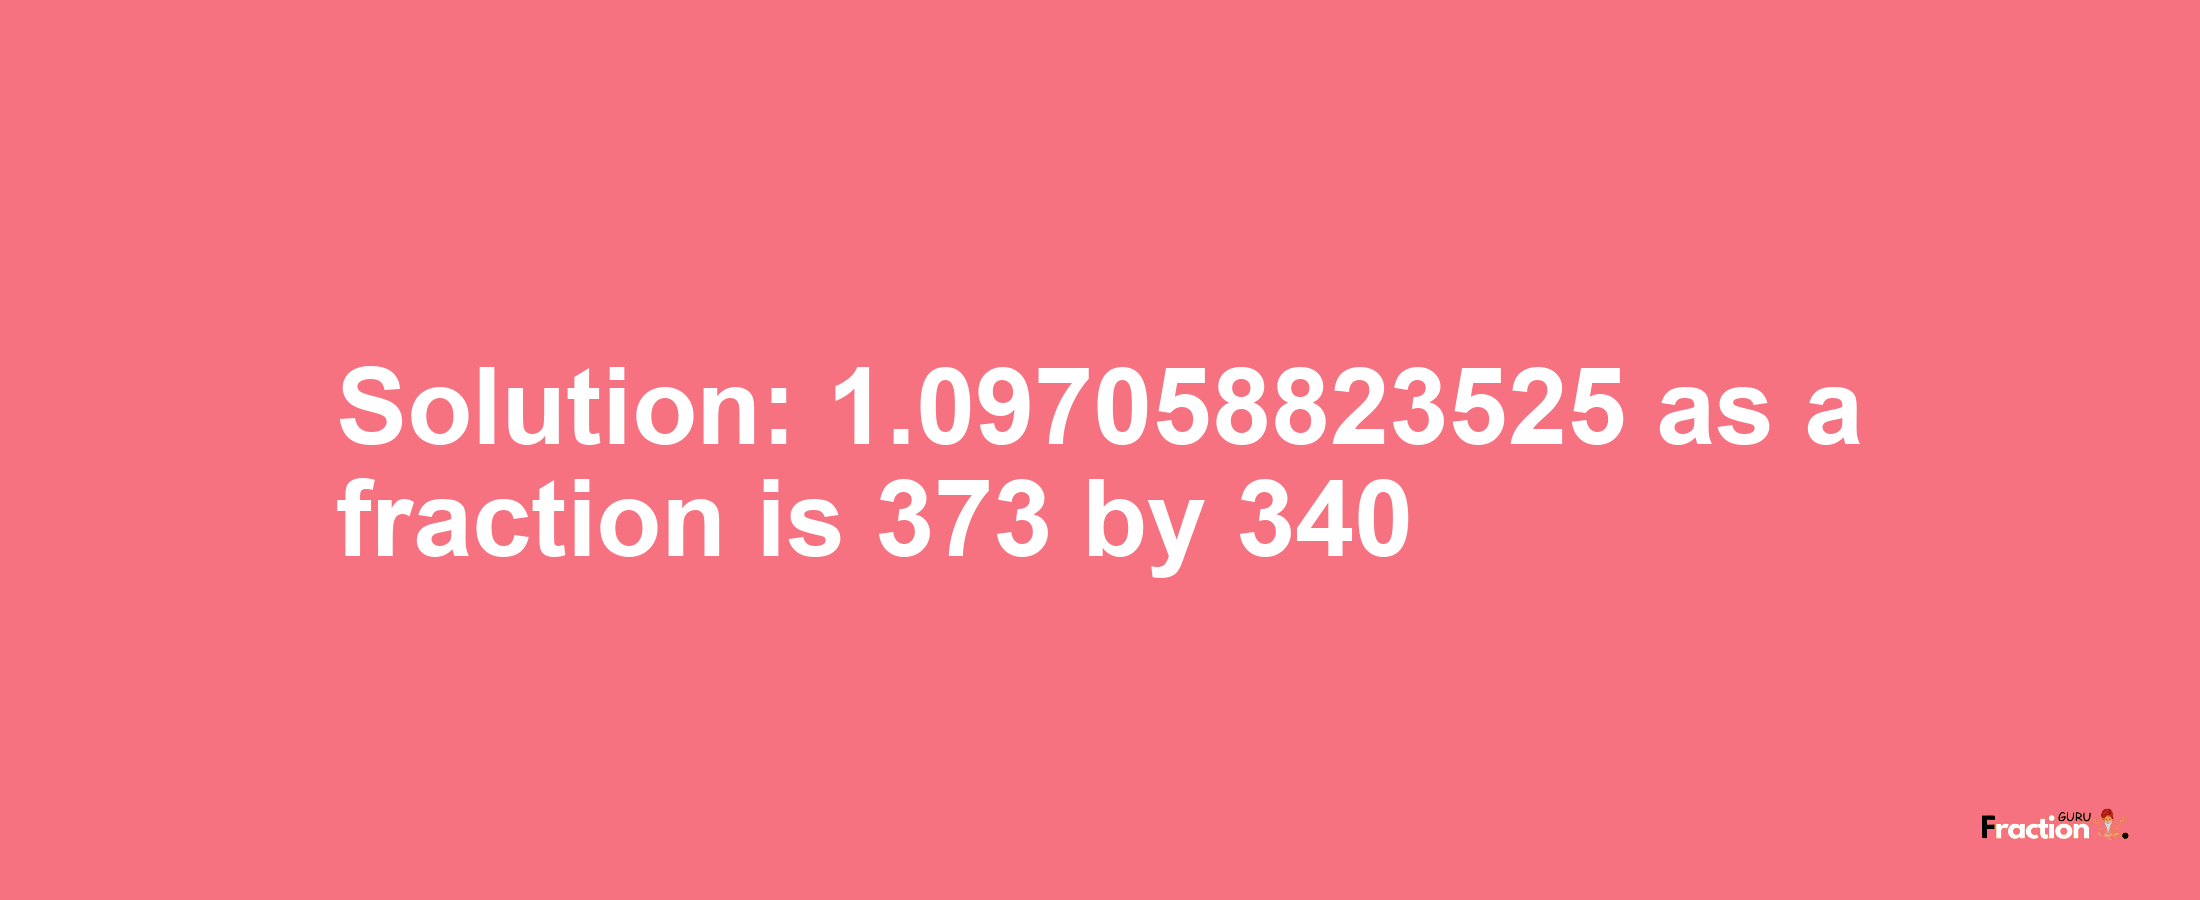 Solution:1.097058823525 as a fraction is 373/340